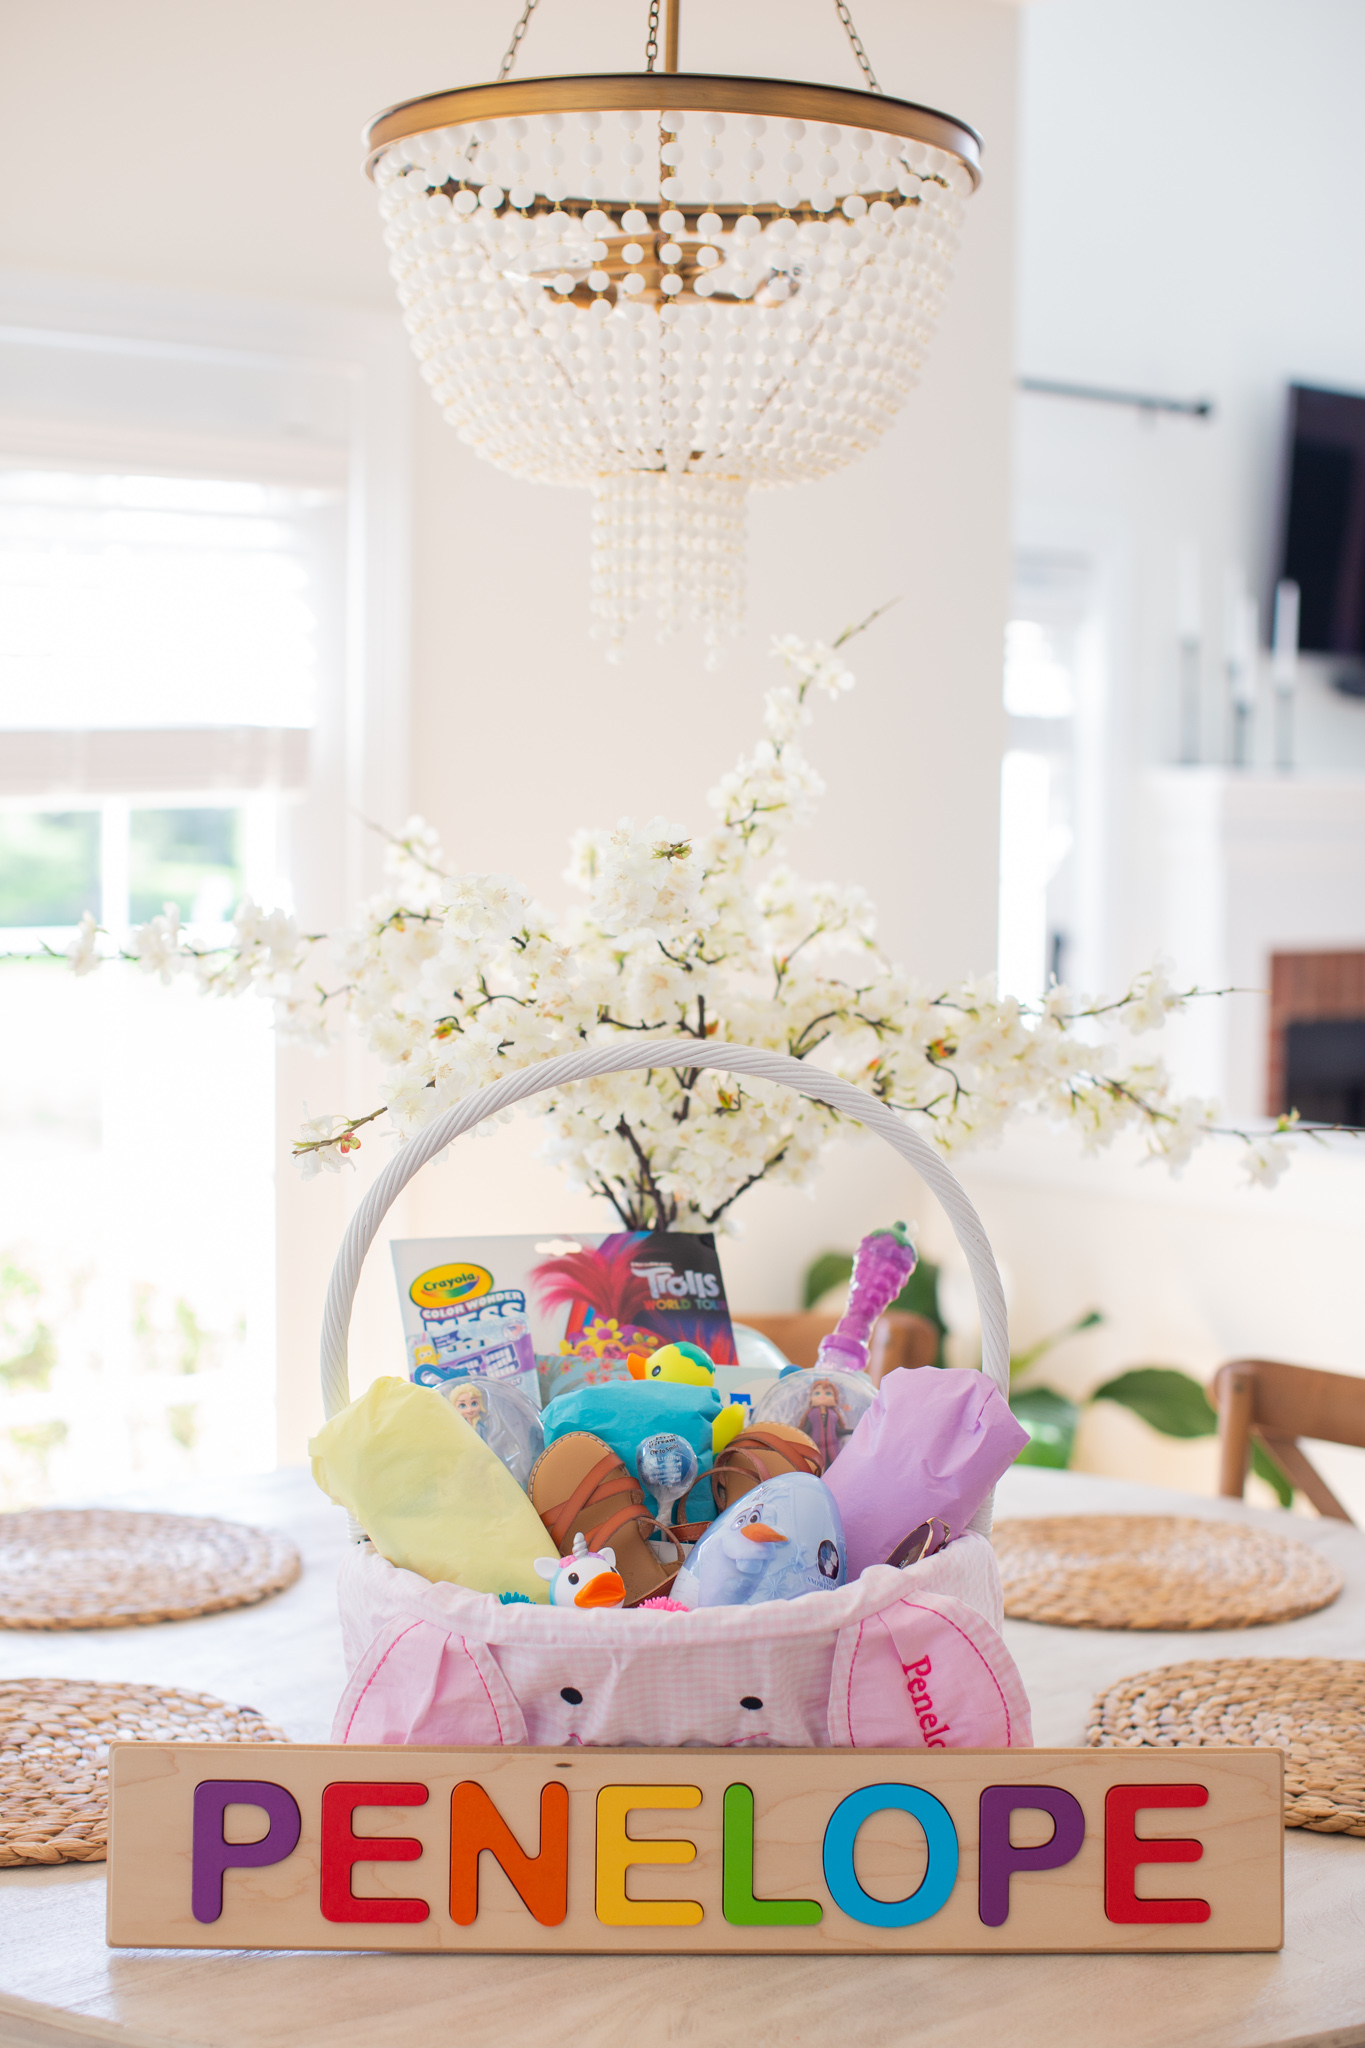 Toddler Easter Basket by popular Ohio lifestyle blog, Coffee Beans and Bobby Pins: image of a white wicker basket with a Pottery Barn Kids Gingham Bunny Face Easter Basket Liner, Amazon Fat Brain Toys Wooden Personalized Name Puzzle, Target Munchkin White Hot Safety Bath Ducky, Target Little Kids Fubble Bubble Wand, Target Cat and Jack sandals, Target Girls' Heart Shape Aviator Sunglasses and Amazon Crayola Baby Shark Color Wonder Coloring Pages.